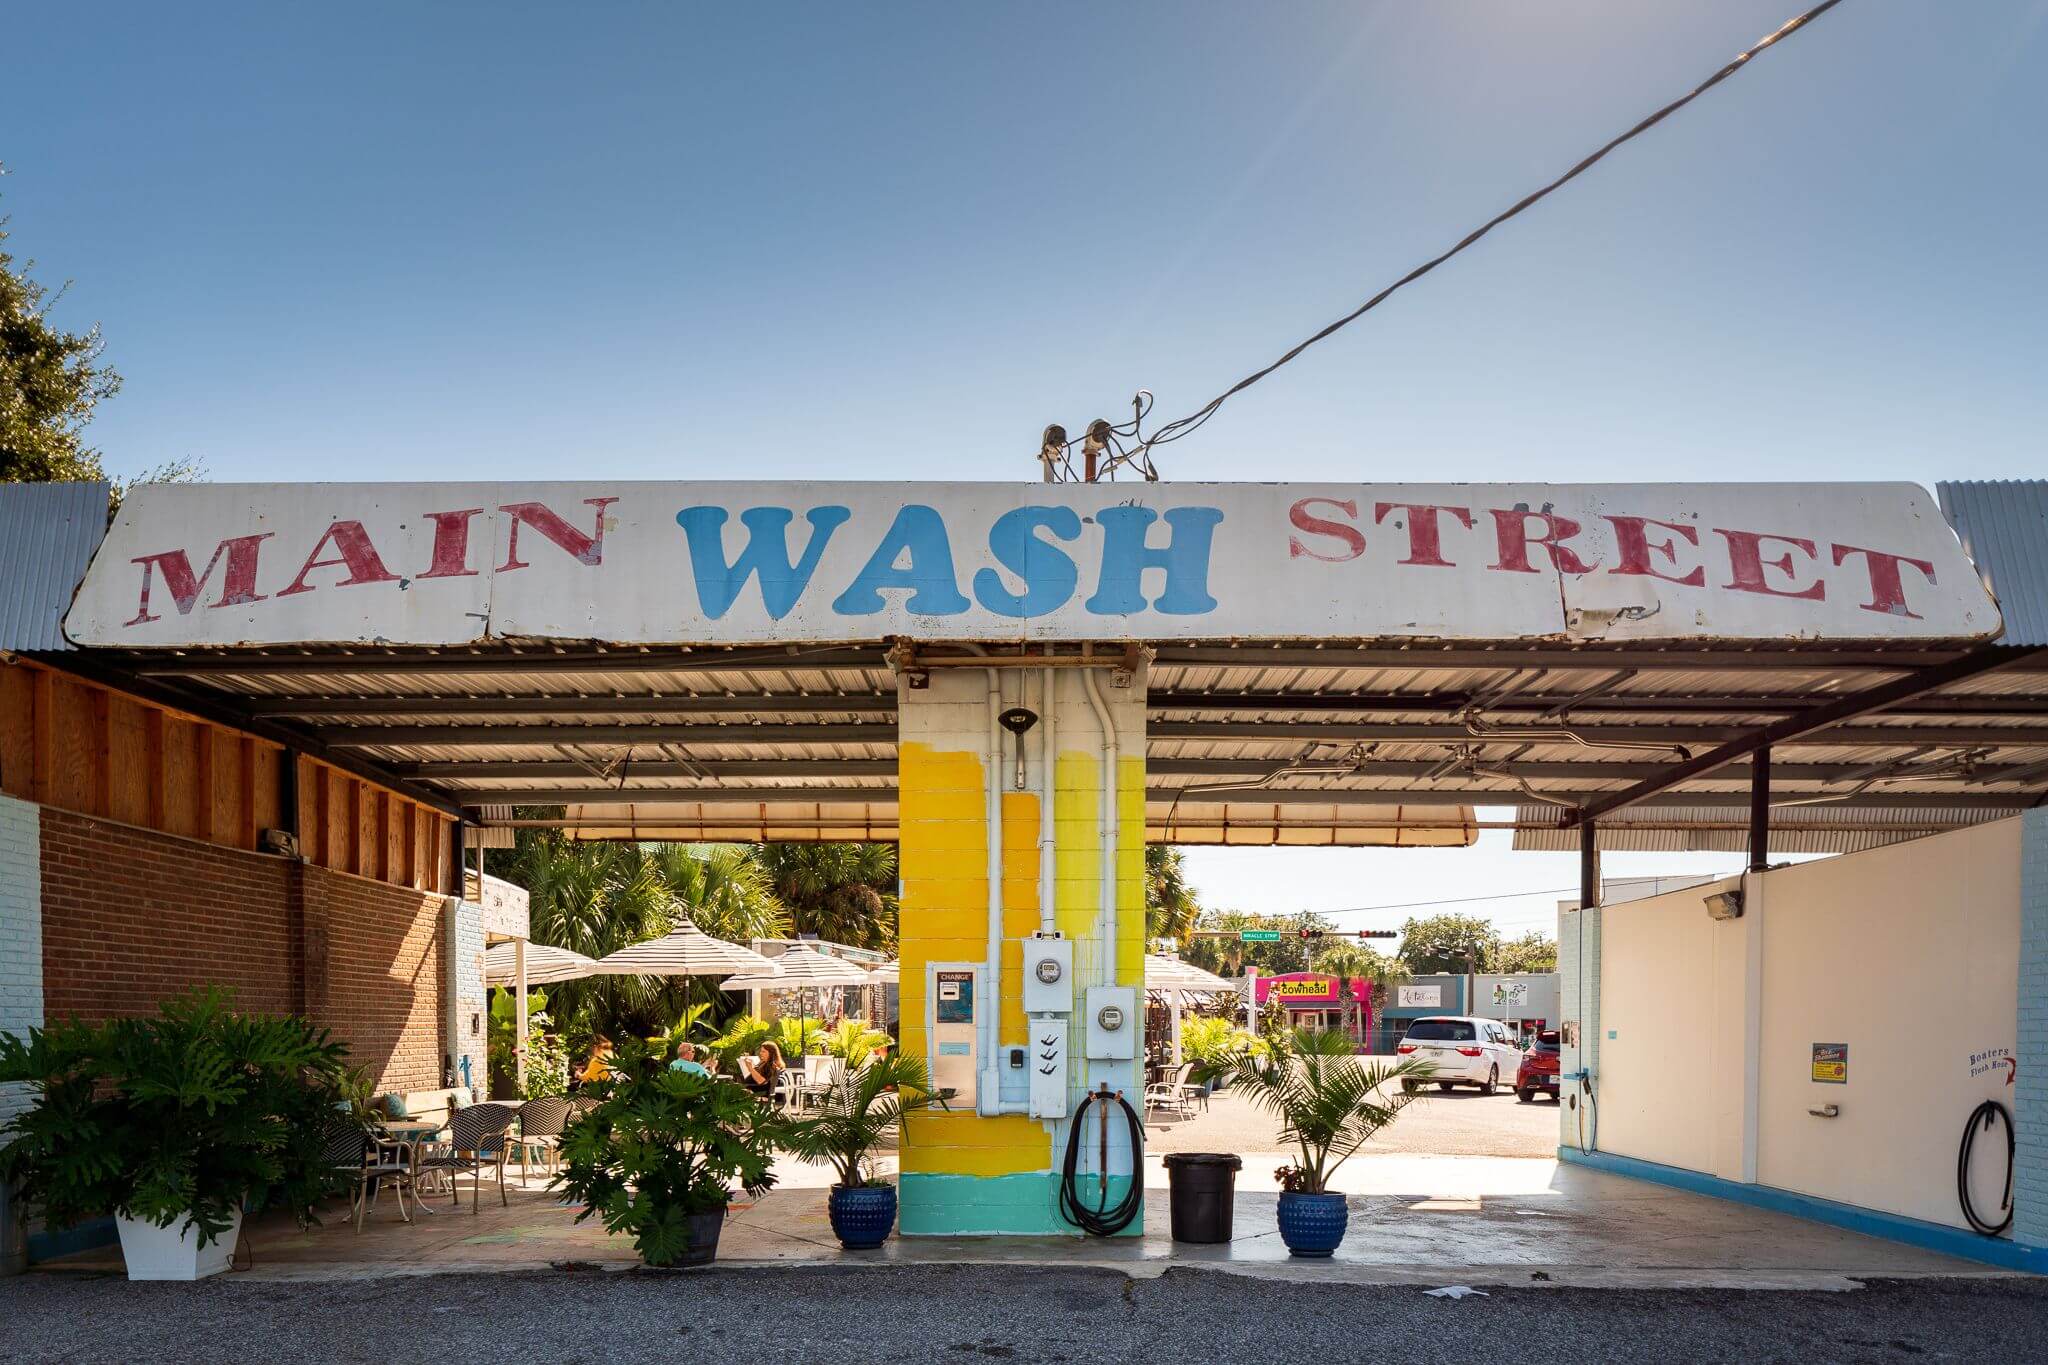 Renovated old-fashioned carwash.